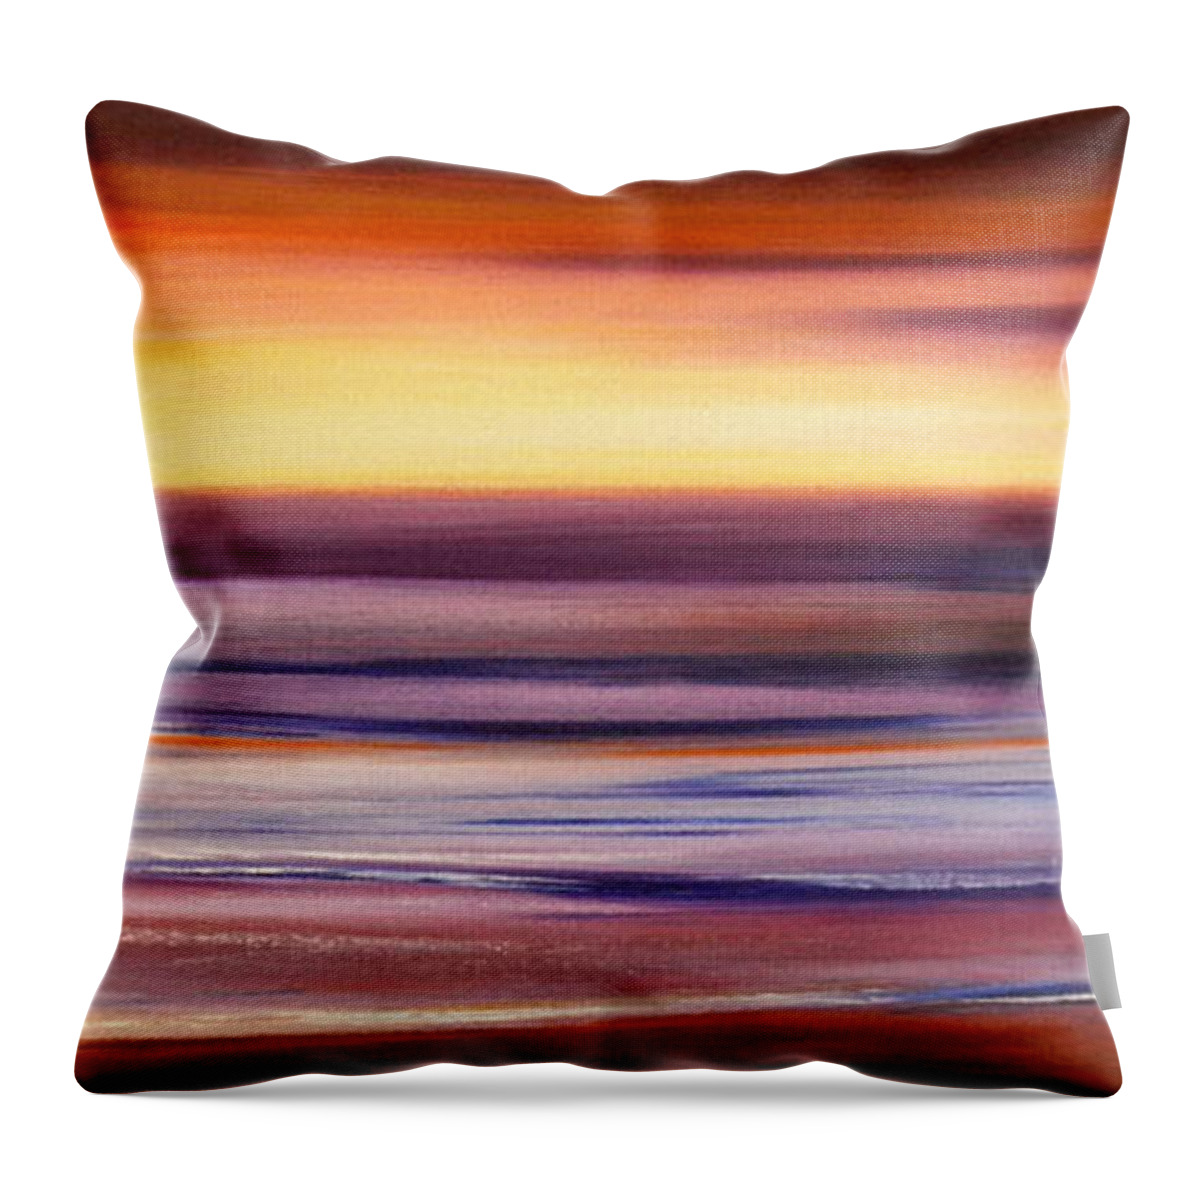 Sunset Paintings Throw Pillow featuring the painting Brushed 2 by Gina De Gorna